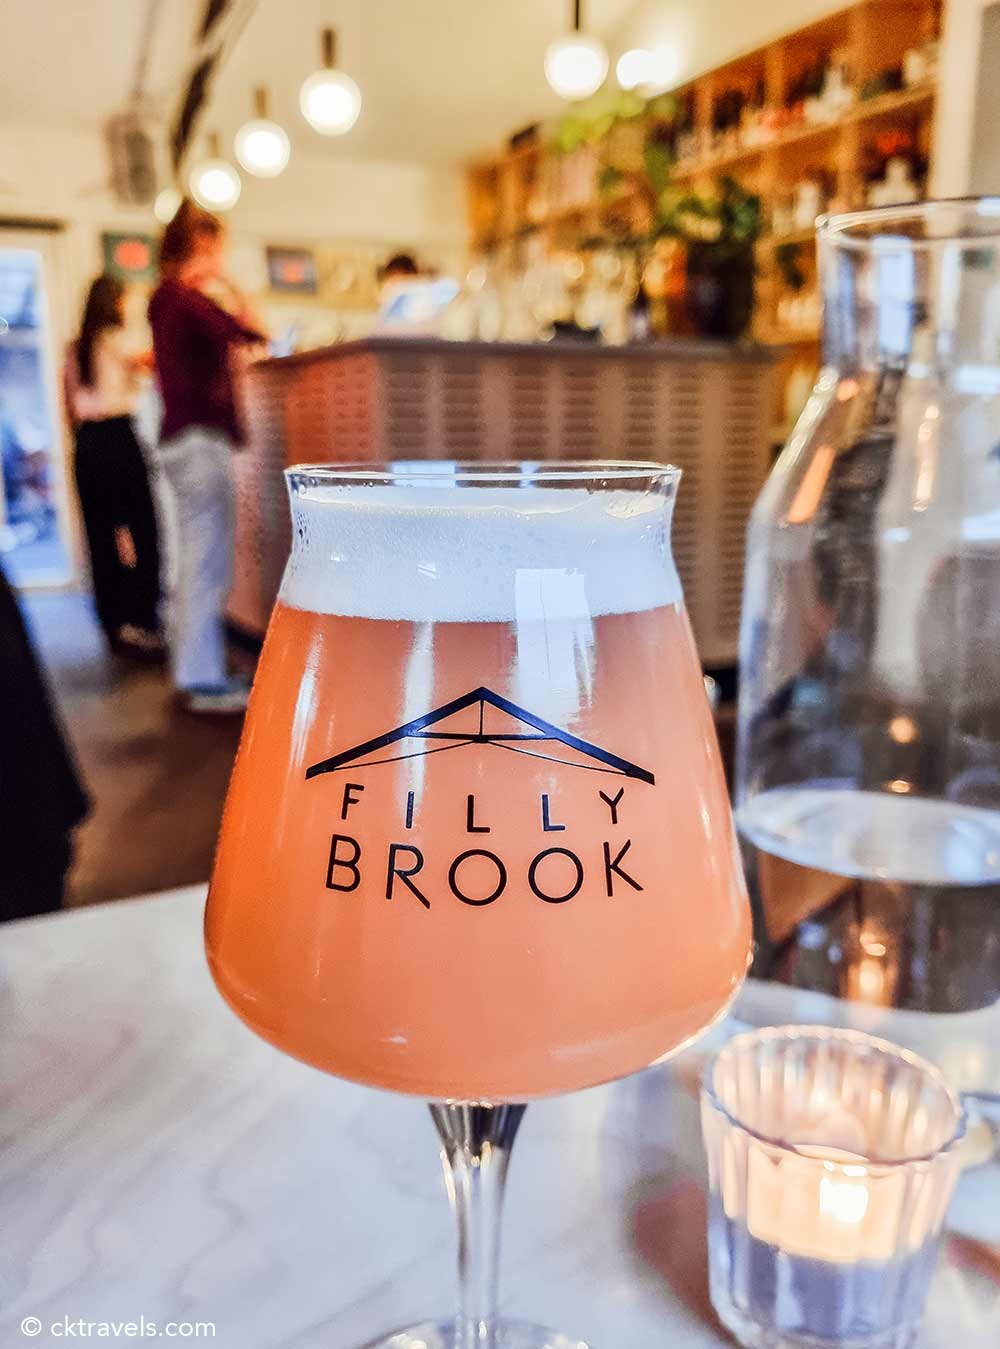 Craft beer at Filly Brook in Leytonstone